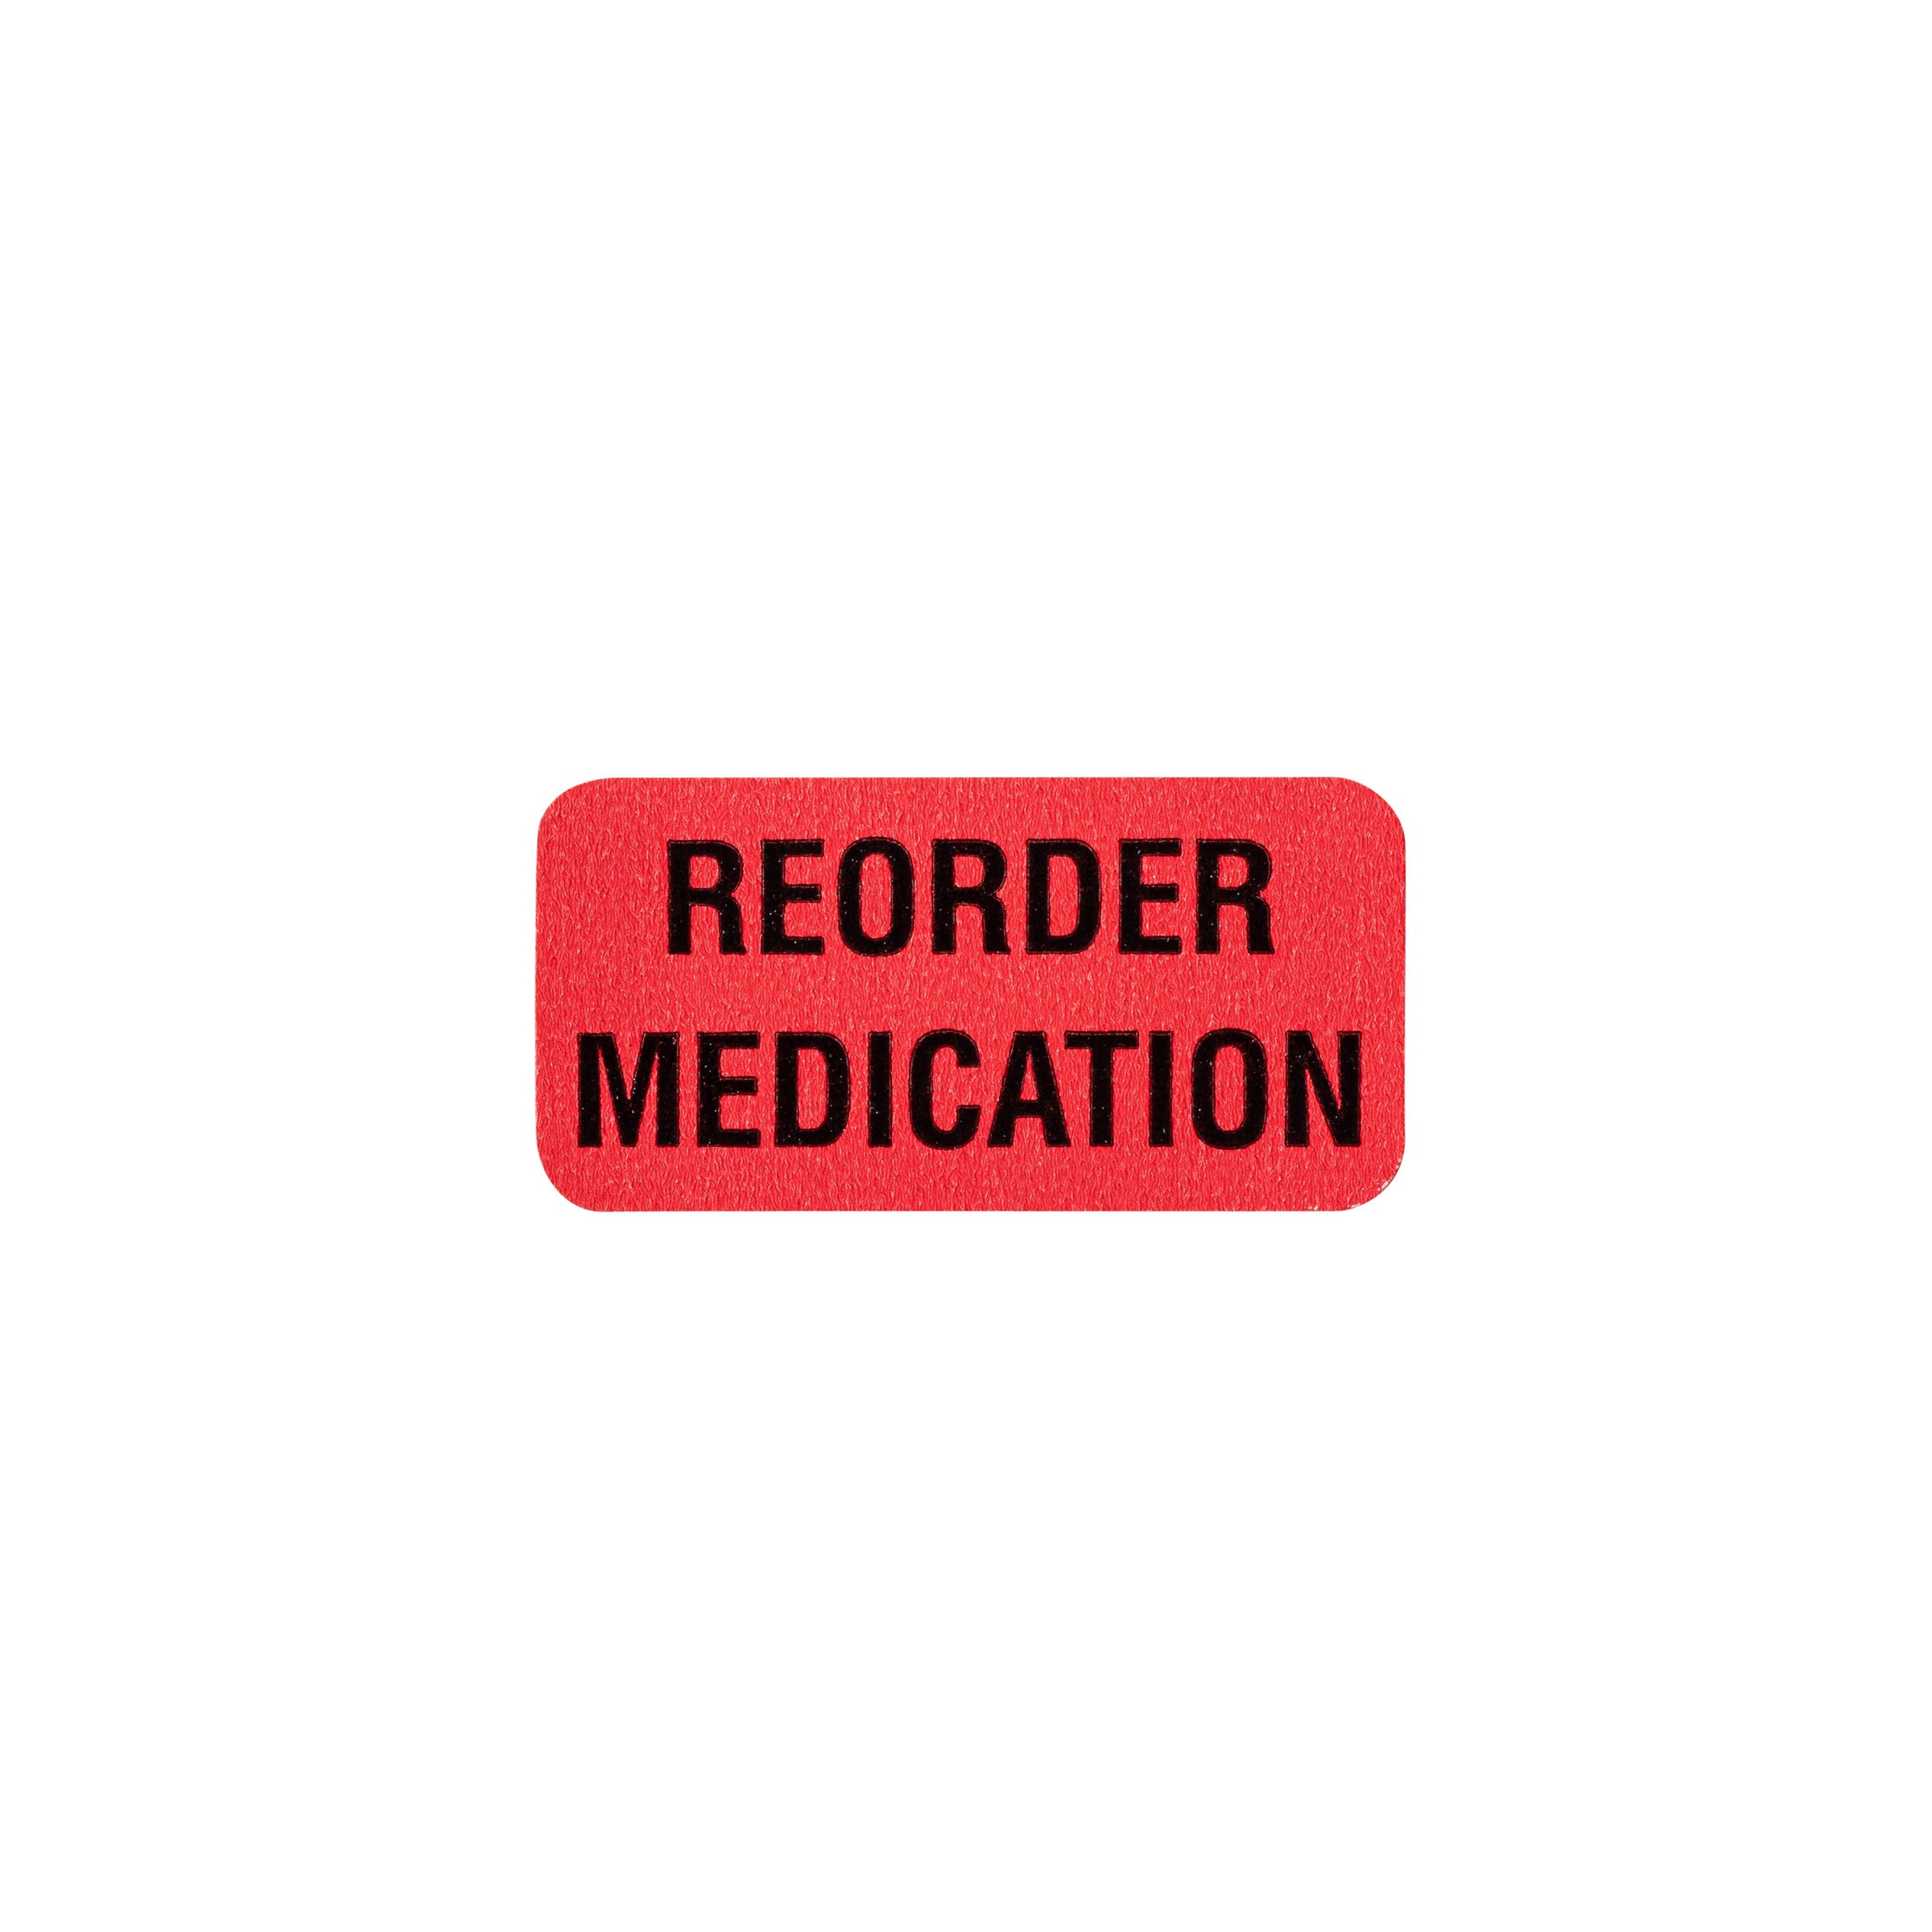 Reorder Medication Alert and Instruction Label, Red, W1.5" x H.75" (Roll of 100)